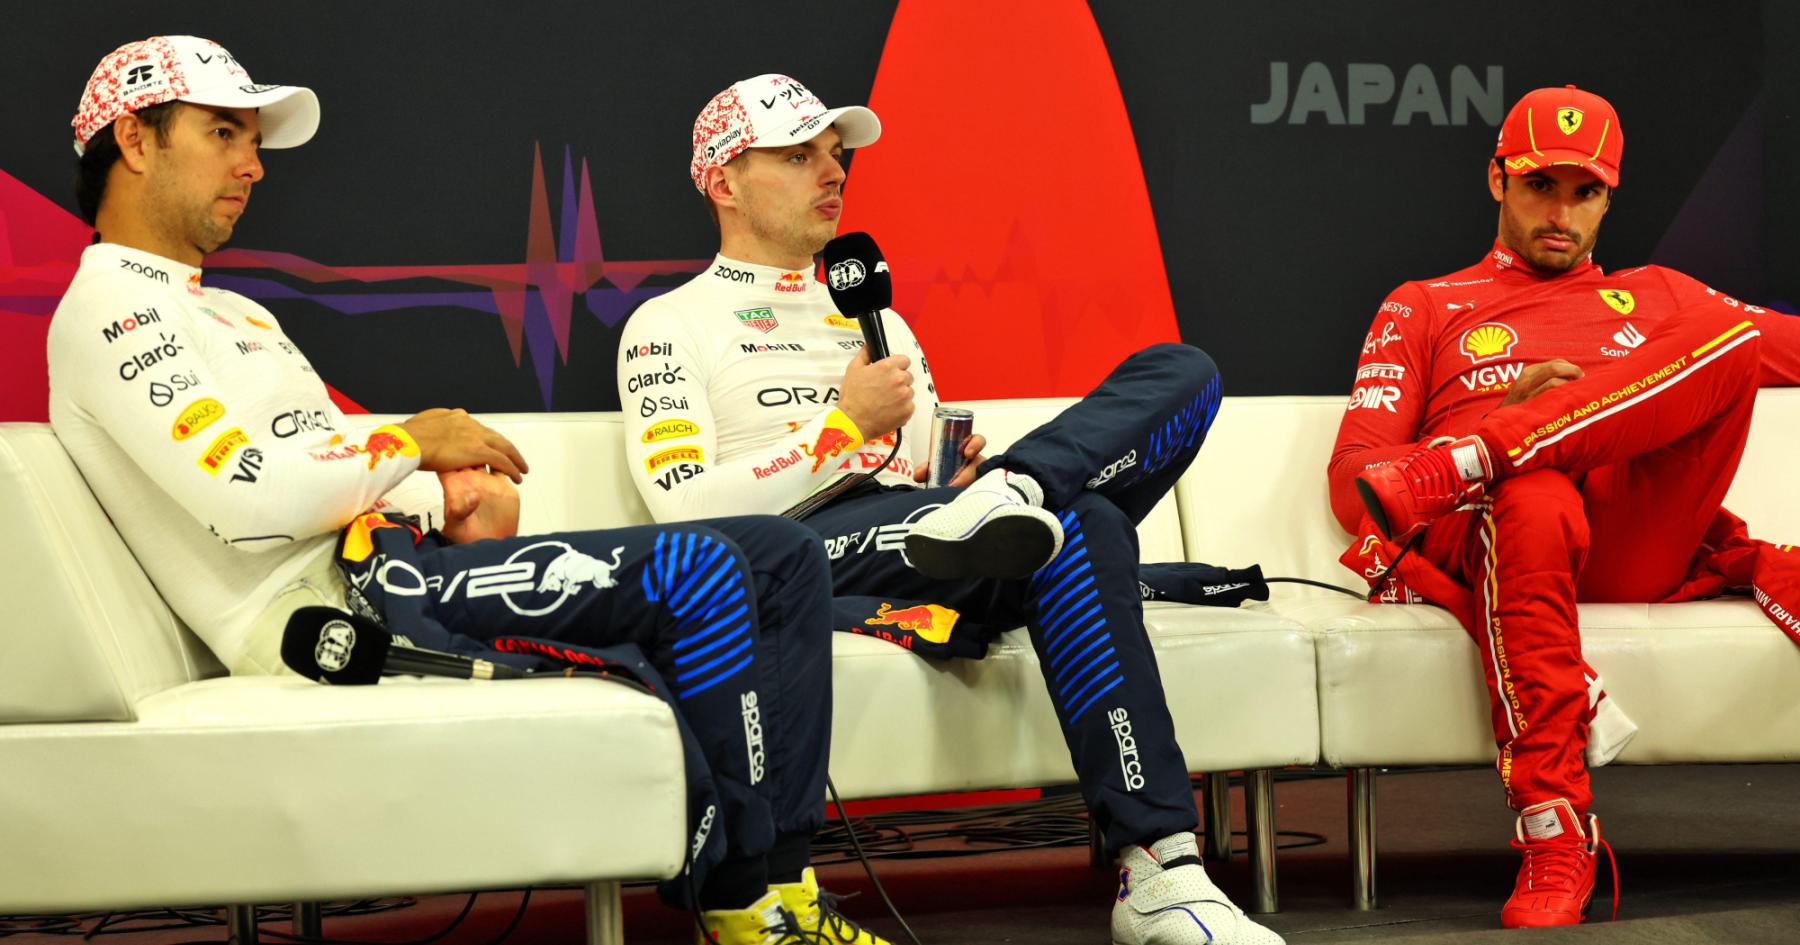 Unpredictable Twists Await: F1 Drivers Gear Up for High-Octane Chinese Grand Prix